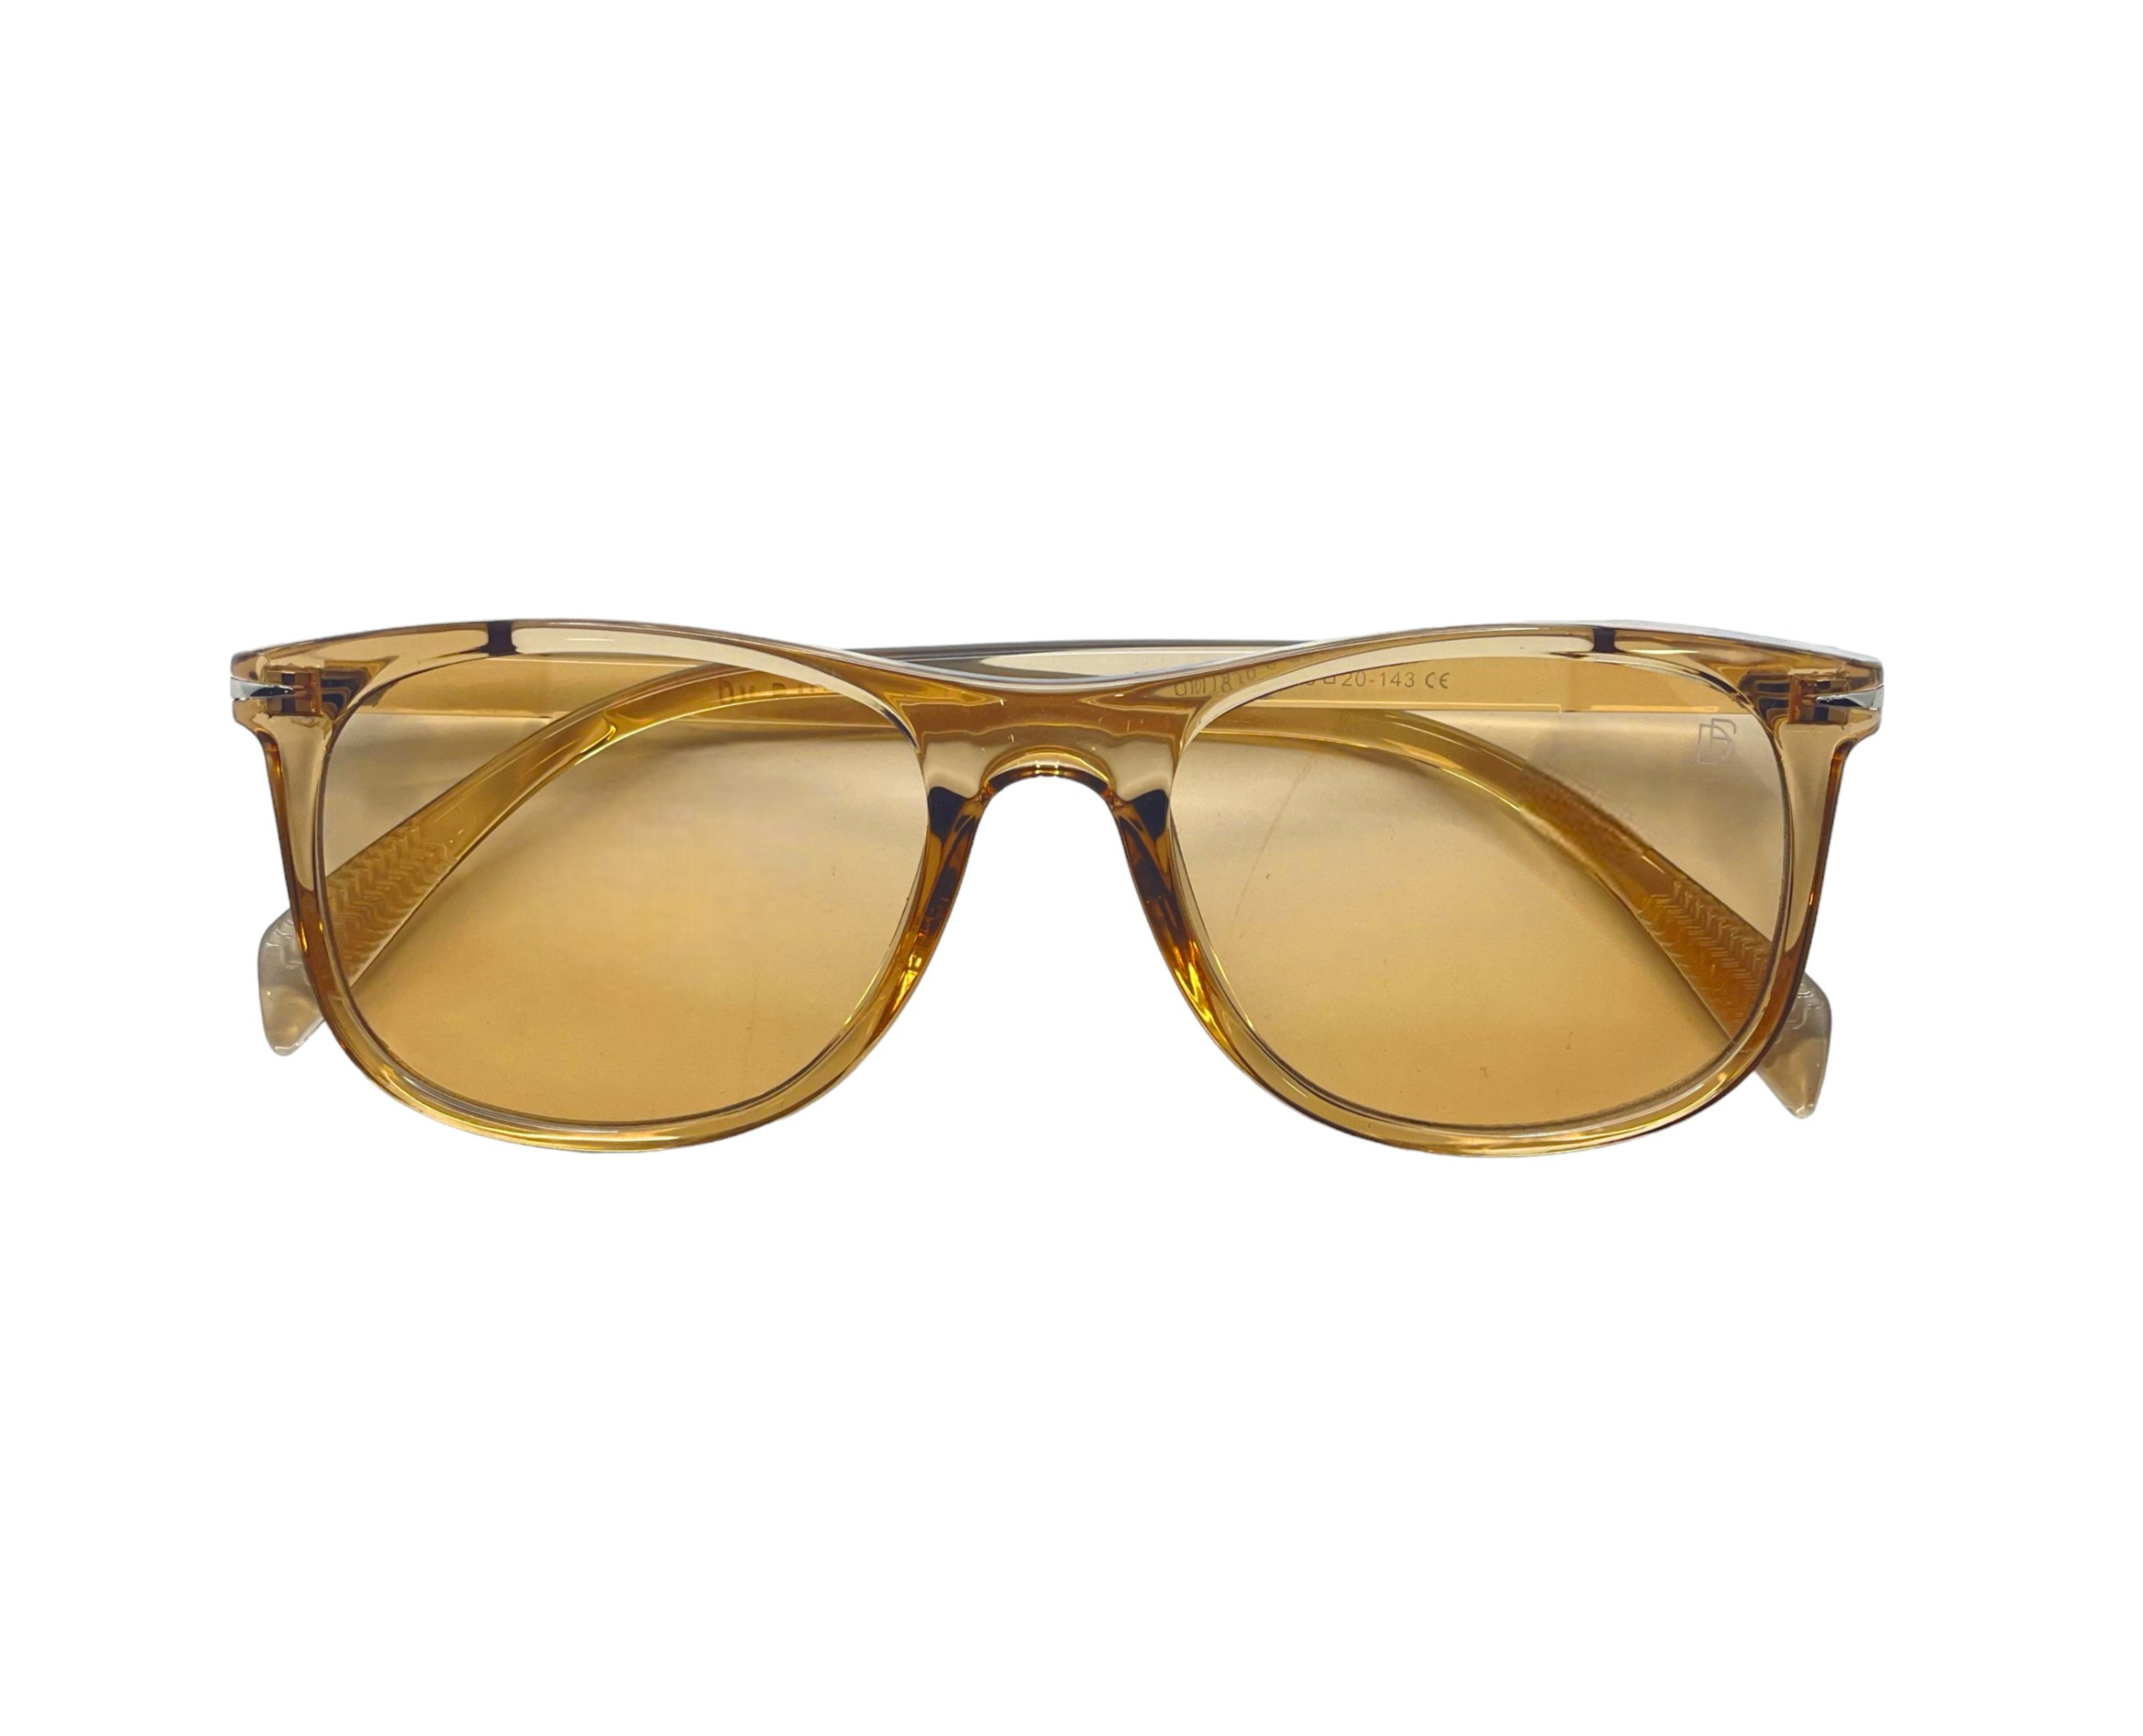 NS Deluxe - 1879 - Brown - Sunglasses